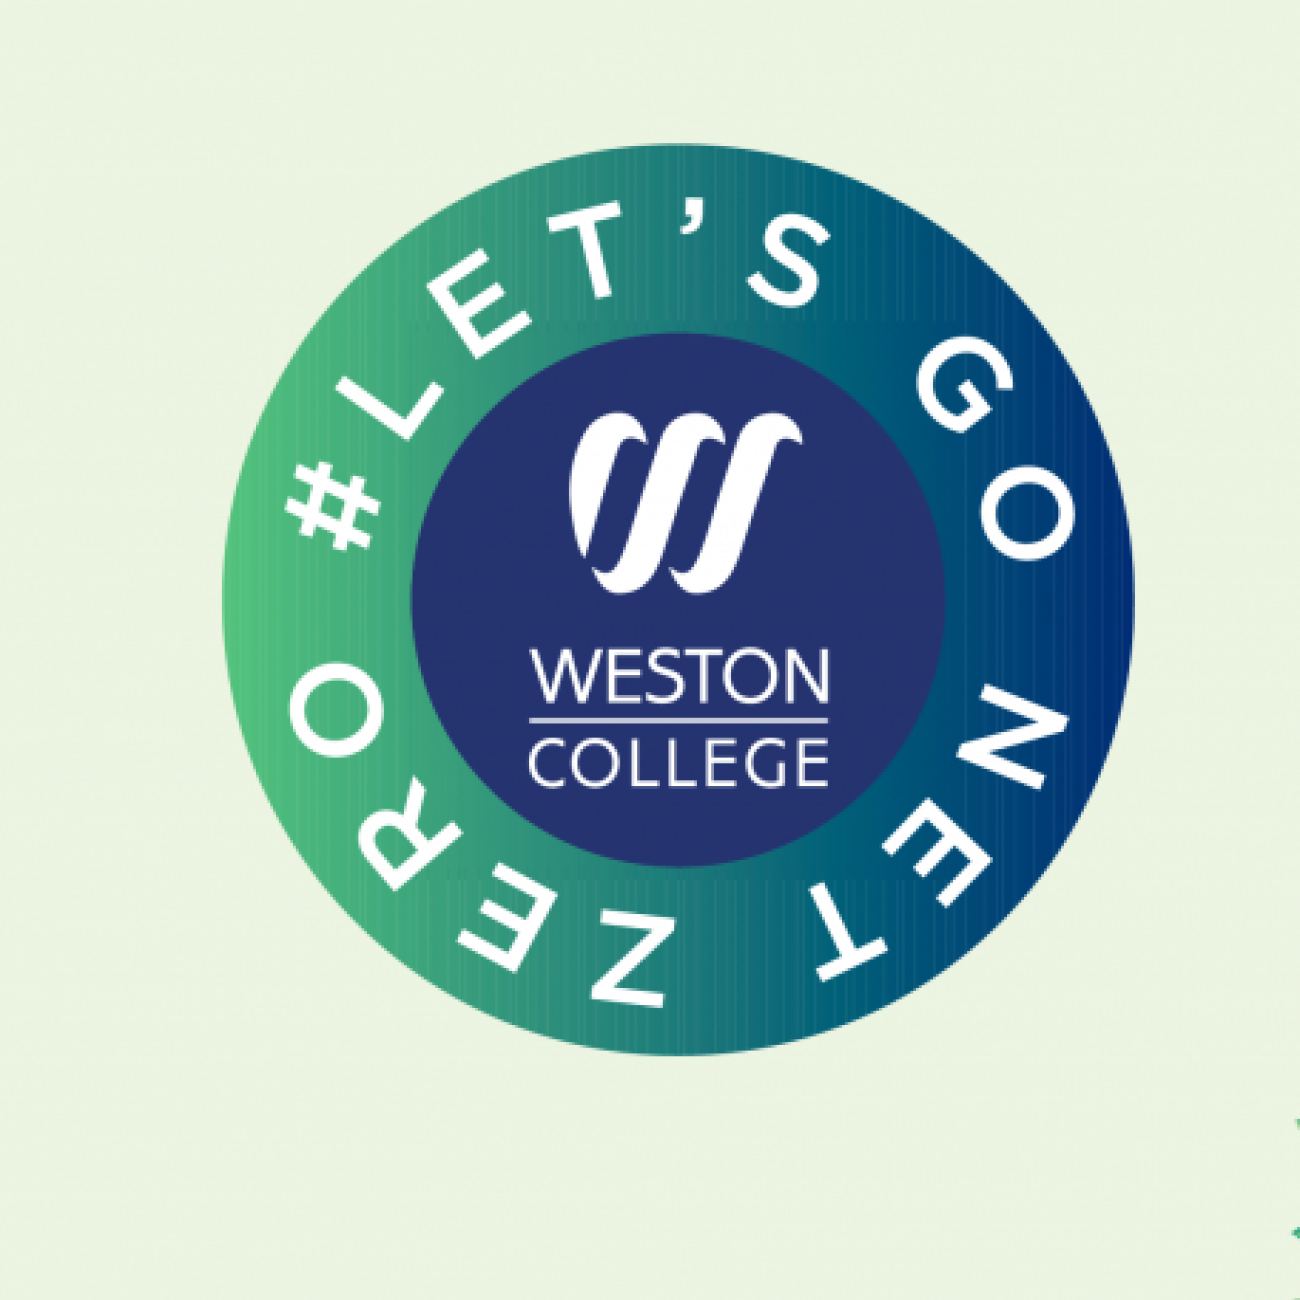 A graphic promoting Weston College aiming for net zero emissions.